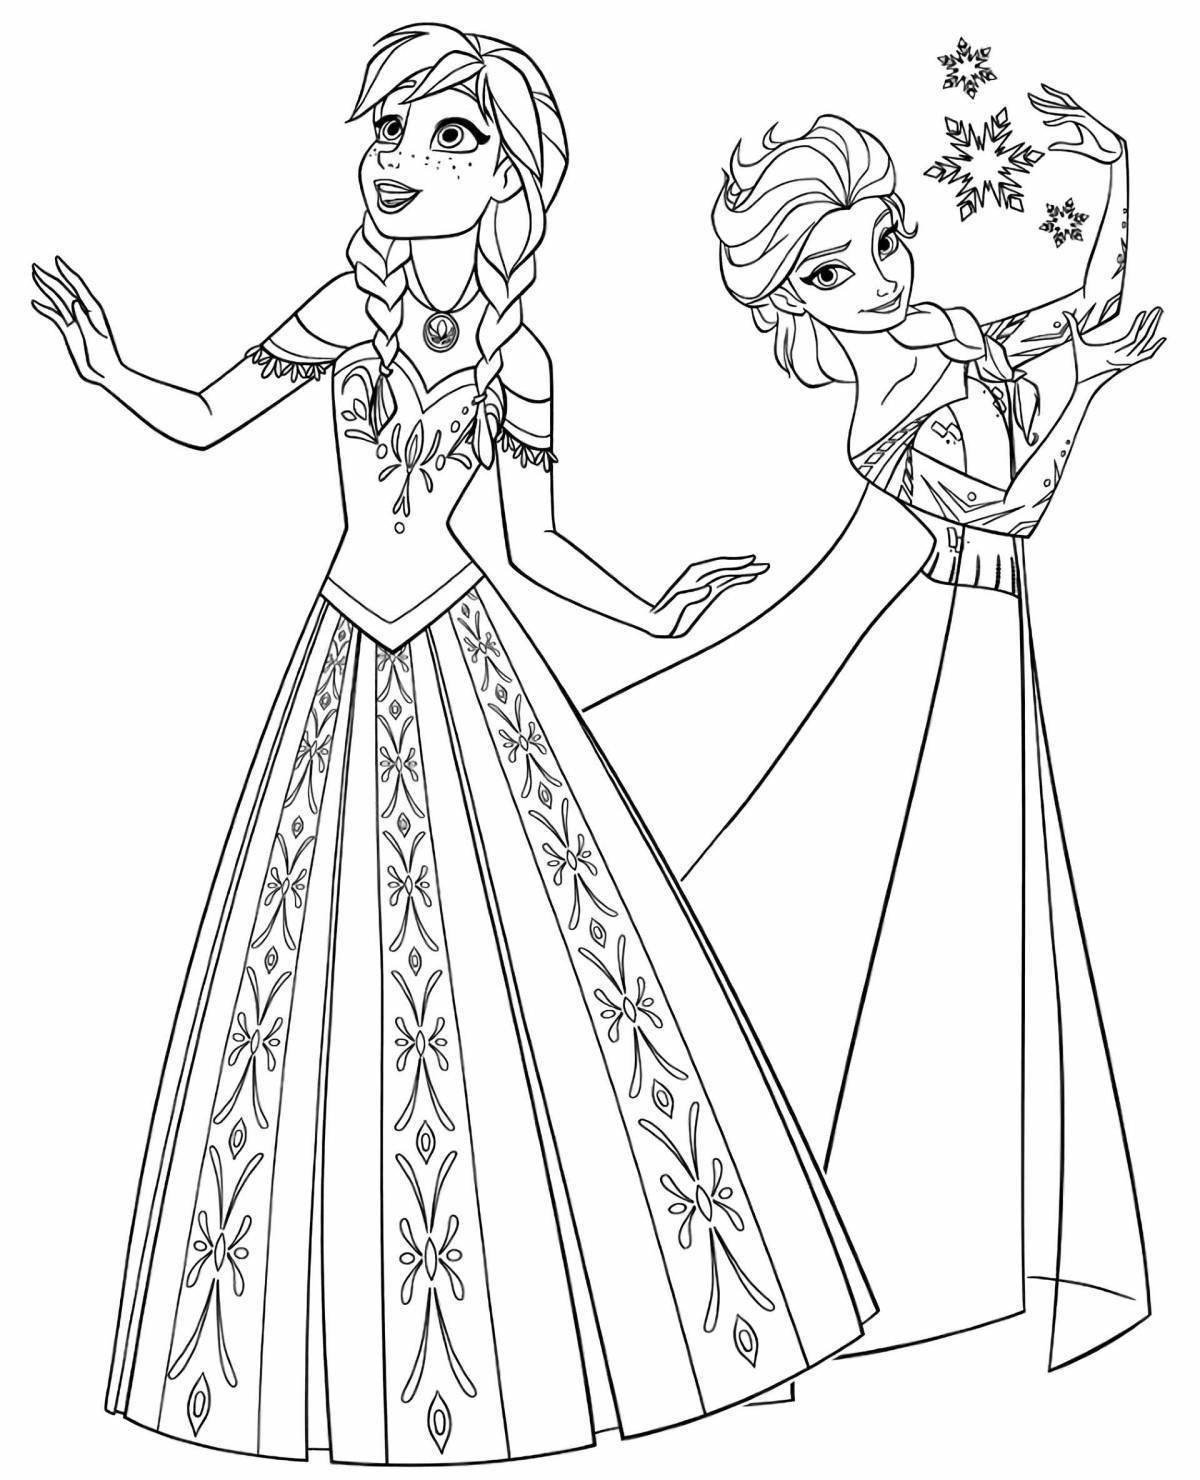 Elsa and anna majestic coloring book for girls